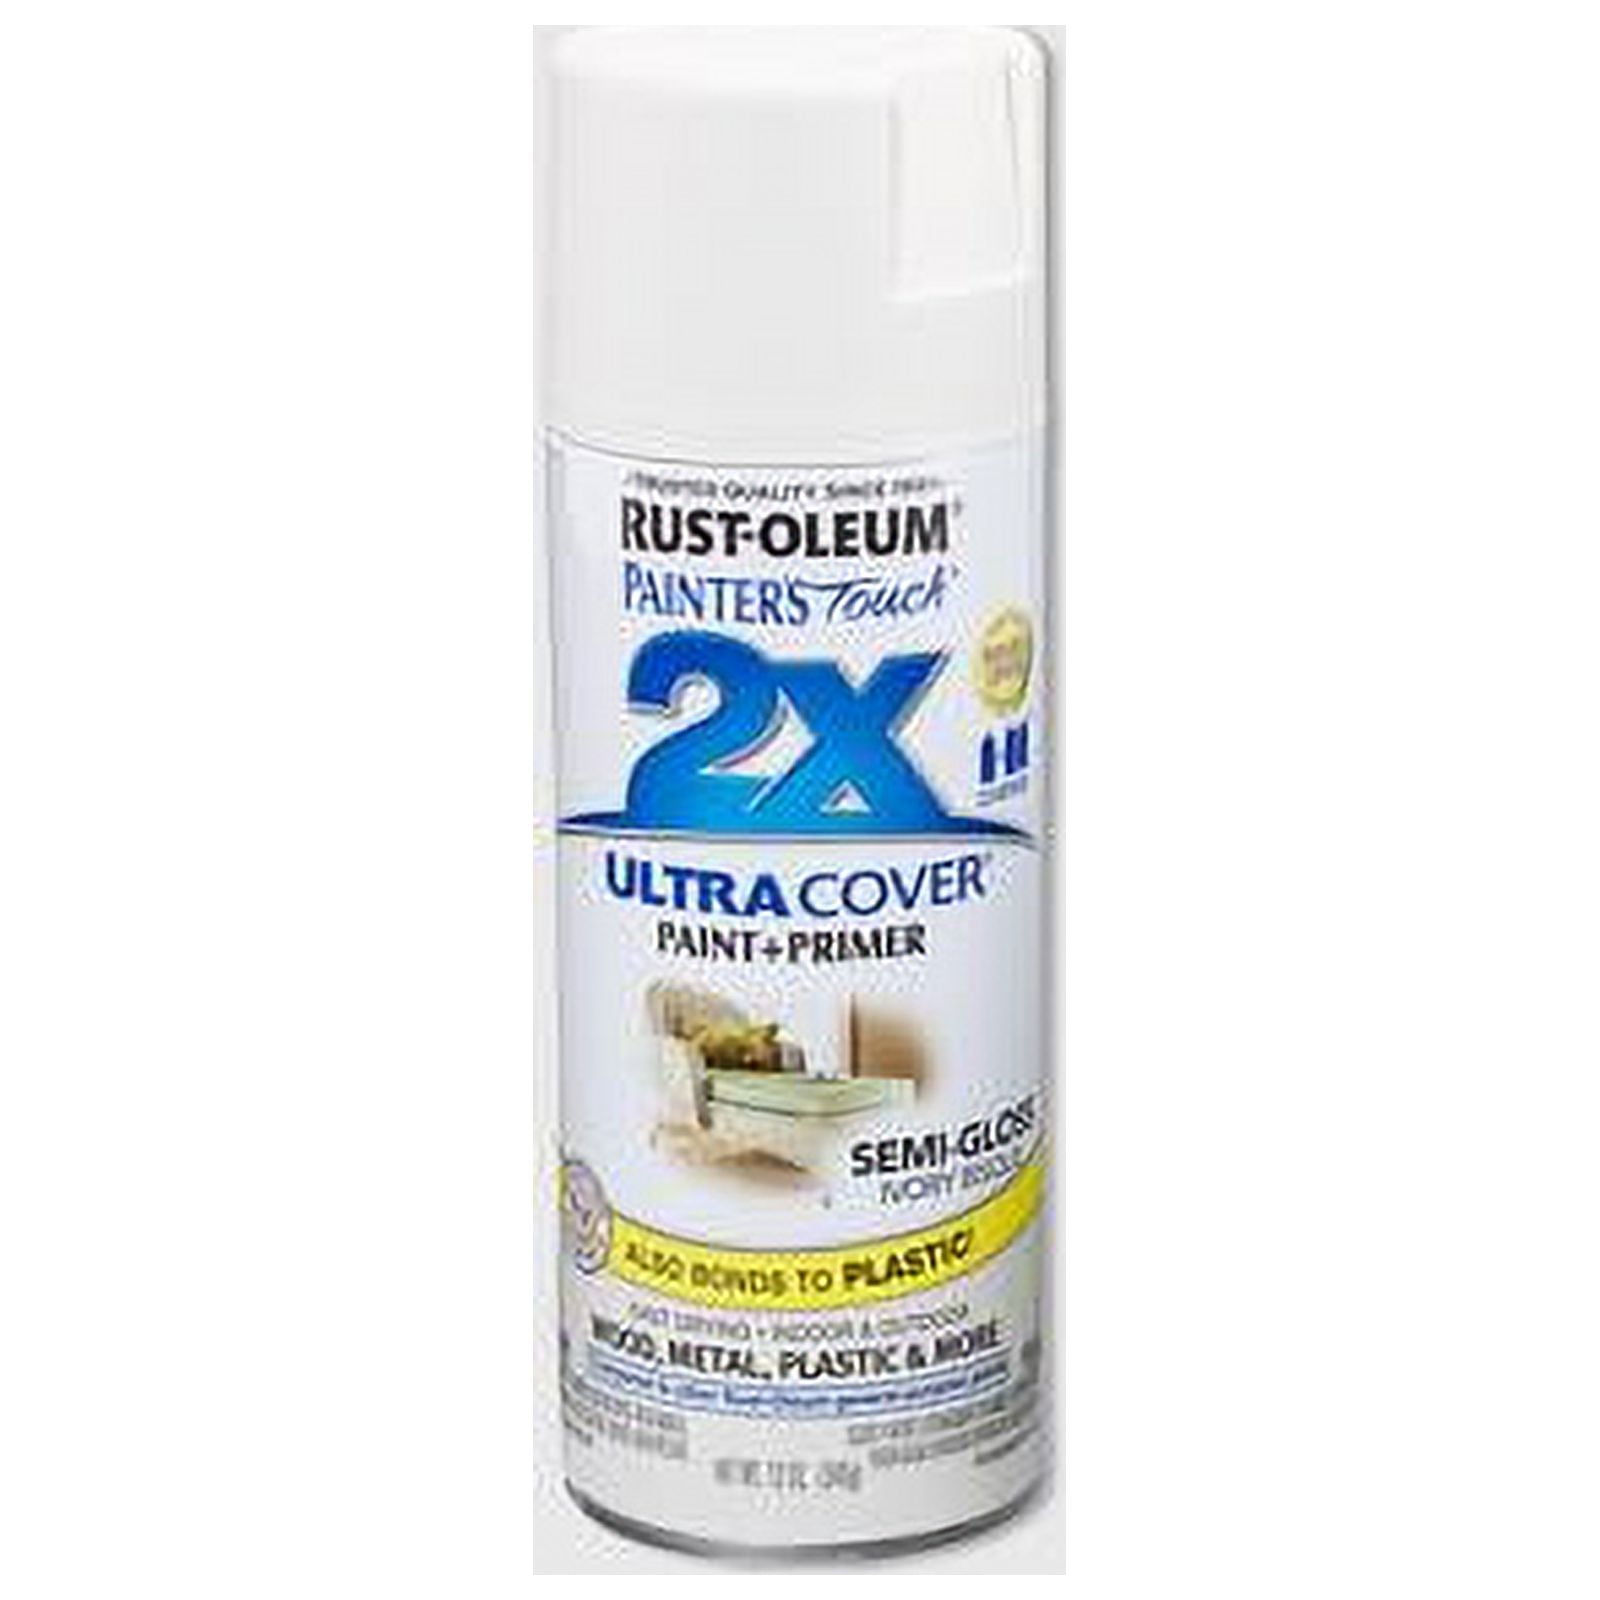 Rustoleum Painter's Touch 2X Ultra Cover  Kelly-Moore Paints - Kelly-Moore  Order Pad